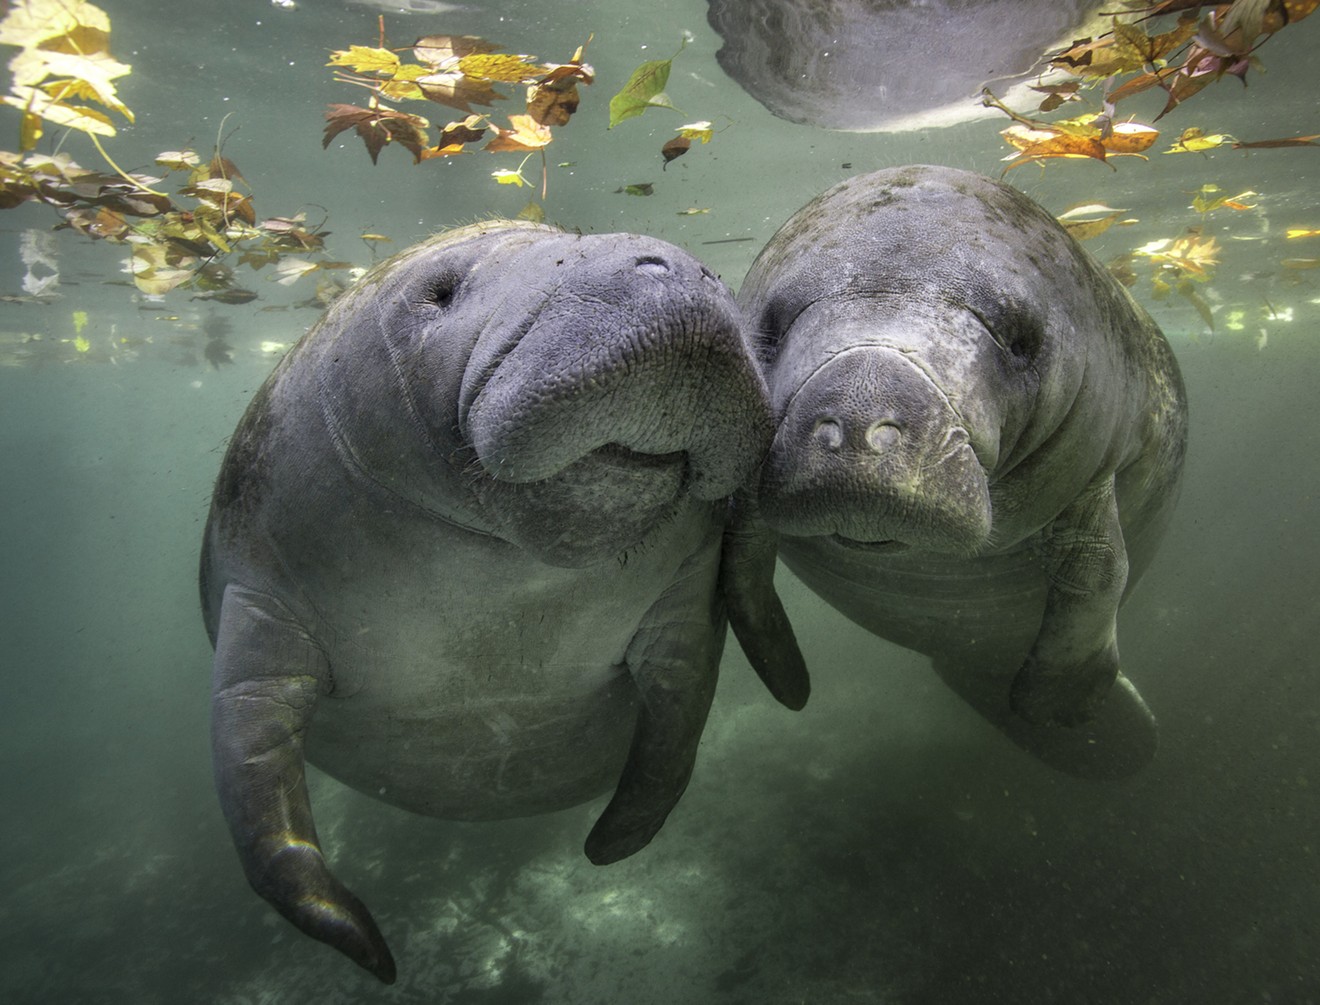 Florida cops are kindly asking people to stop calling the police on manatees having sex.